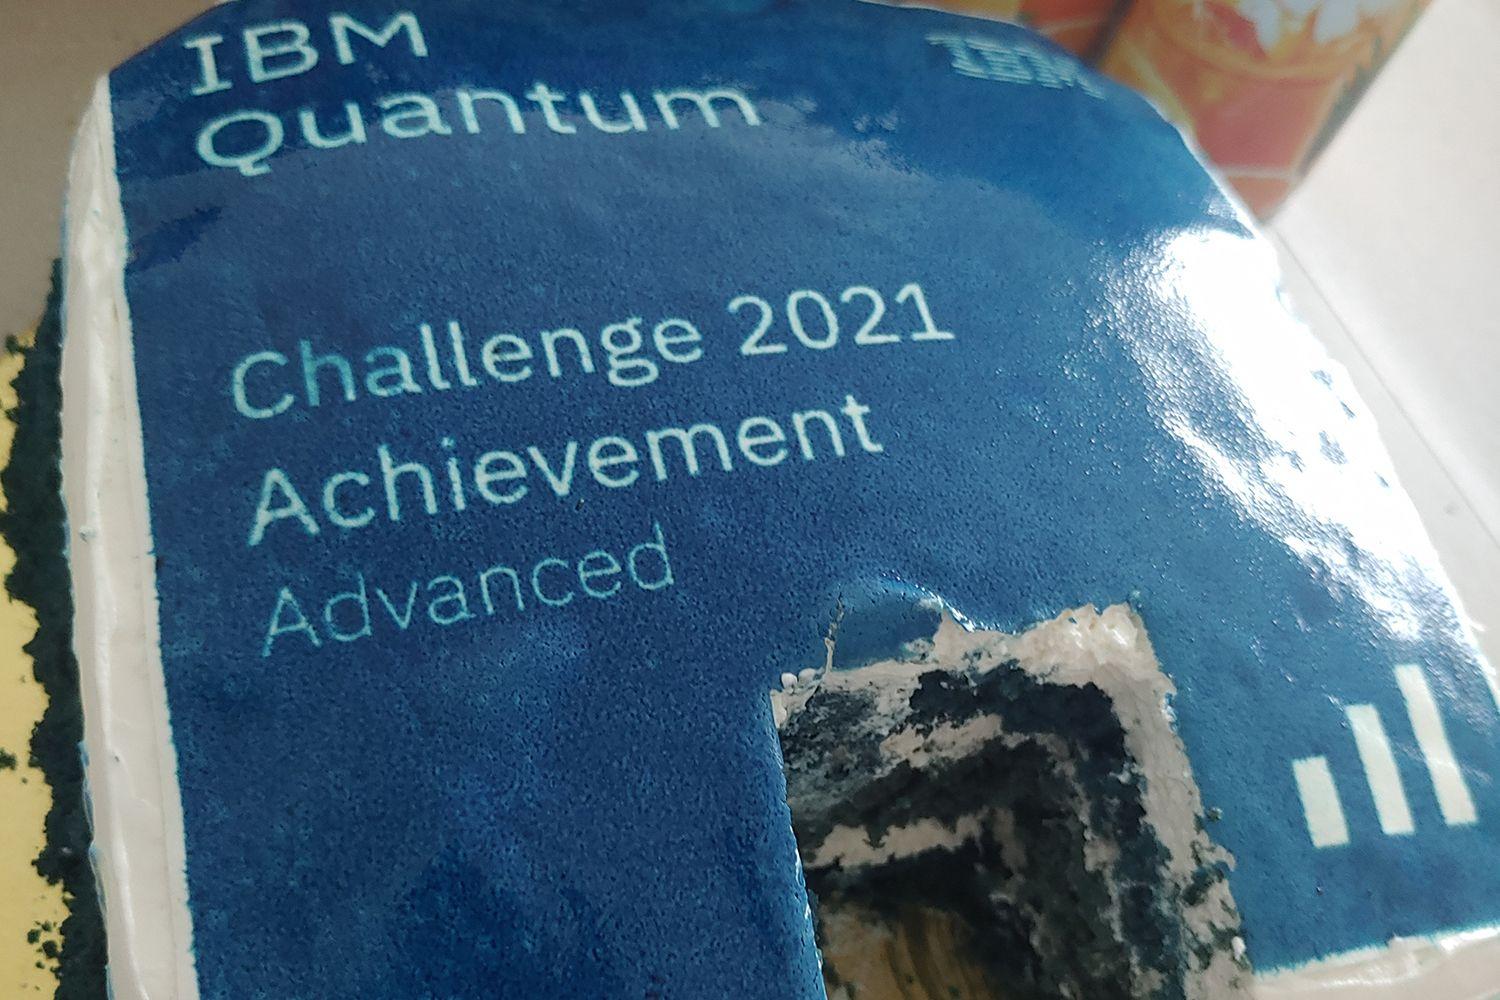 IBM Quantum Challenge cake baked by participants.